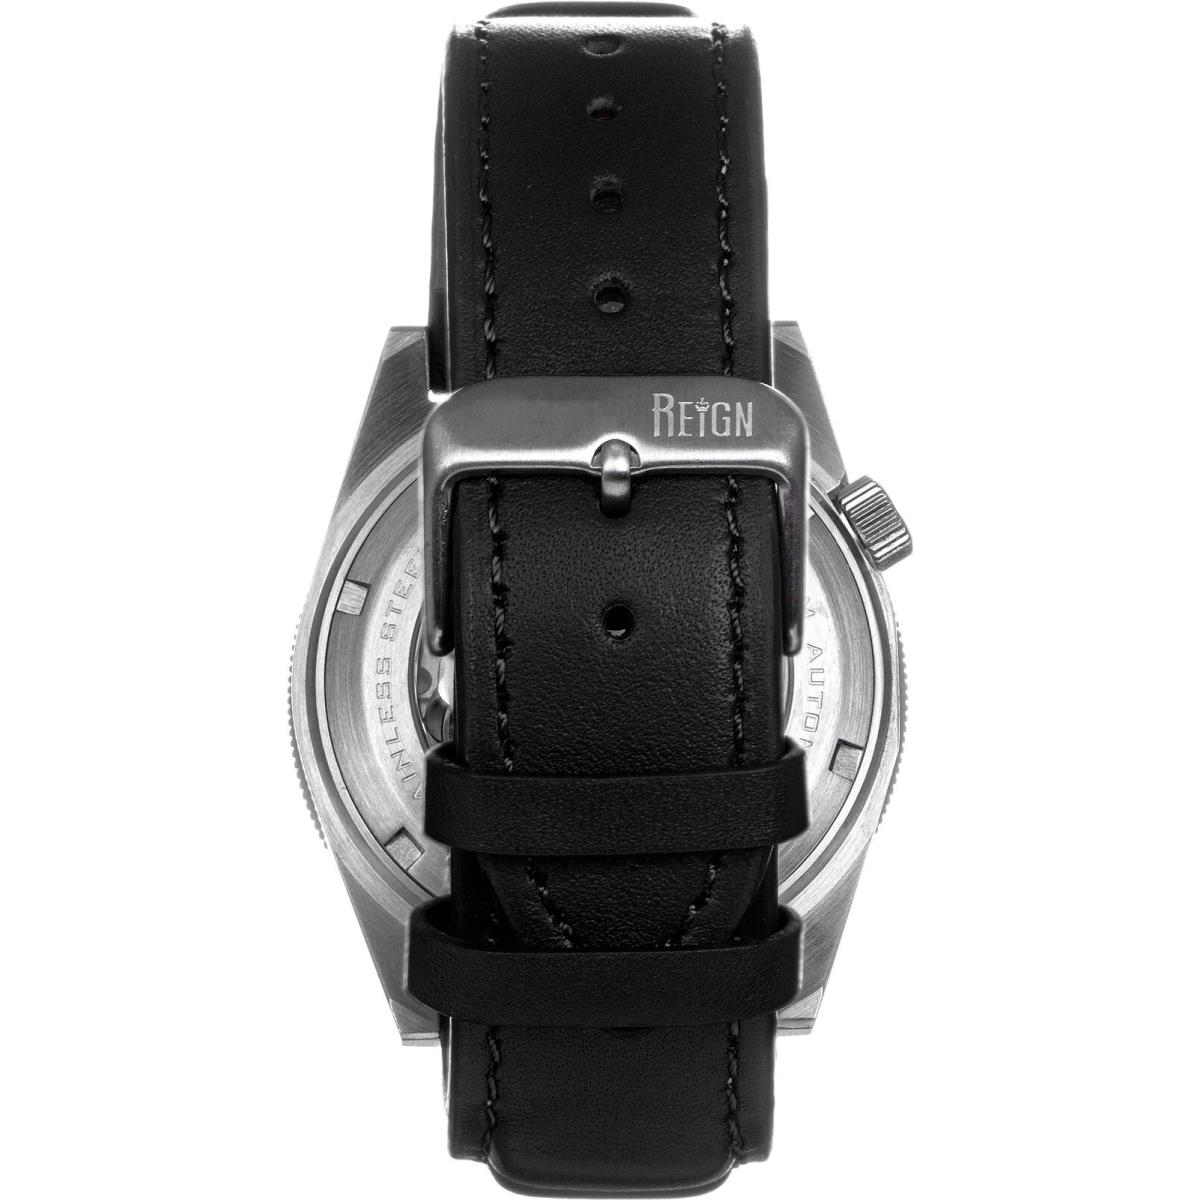 Reign Francis Leather-band Watch W/date Black/silver One Size REIRN6301